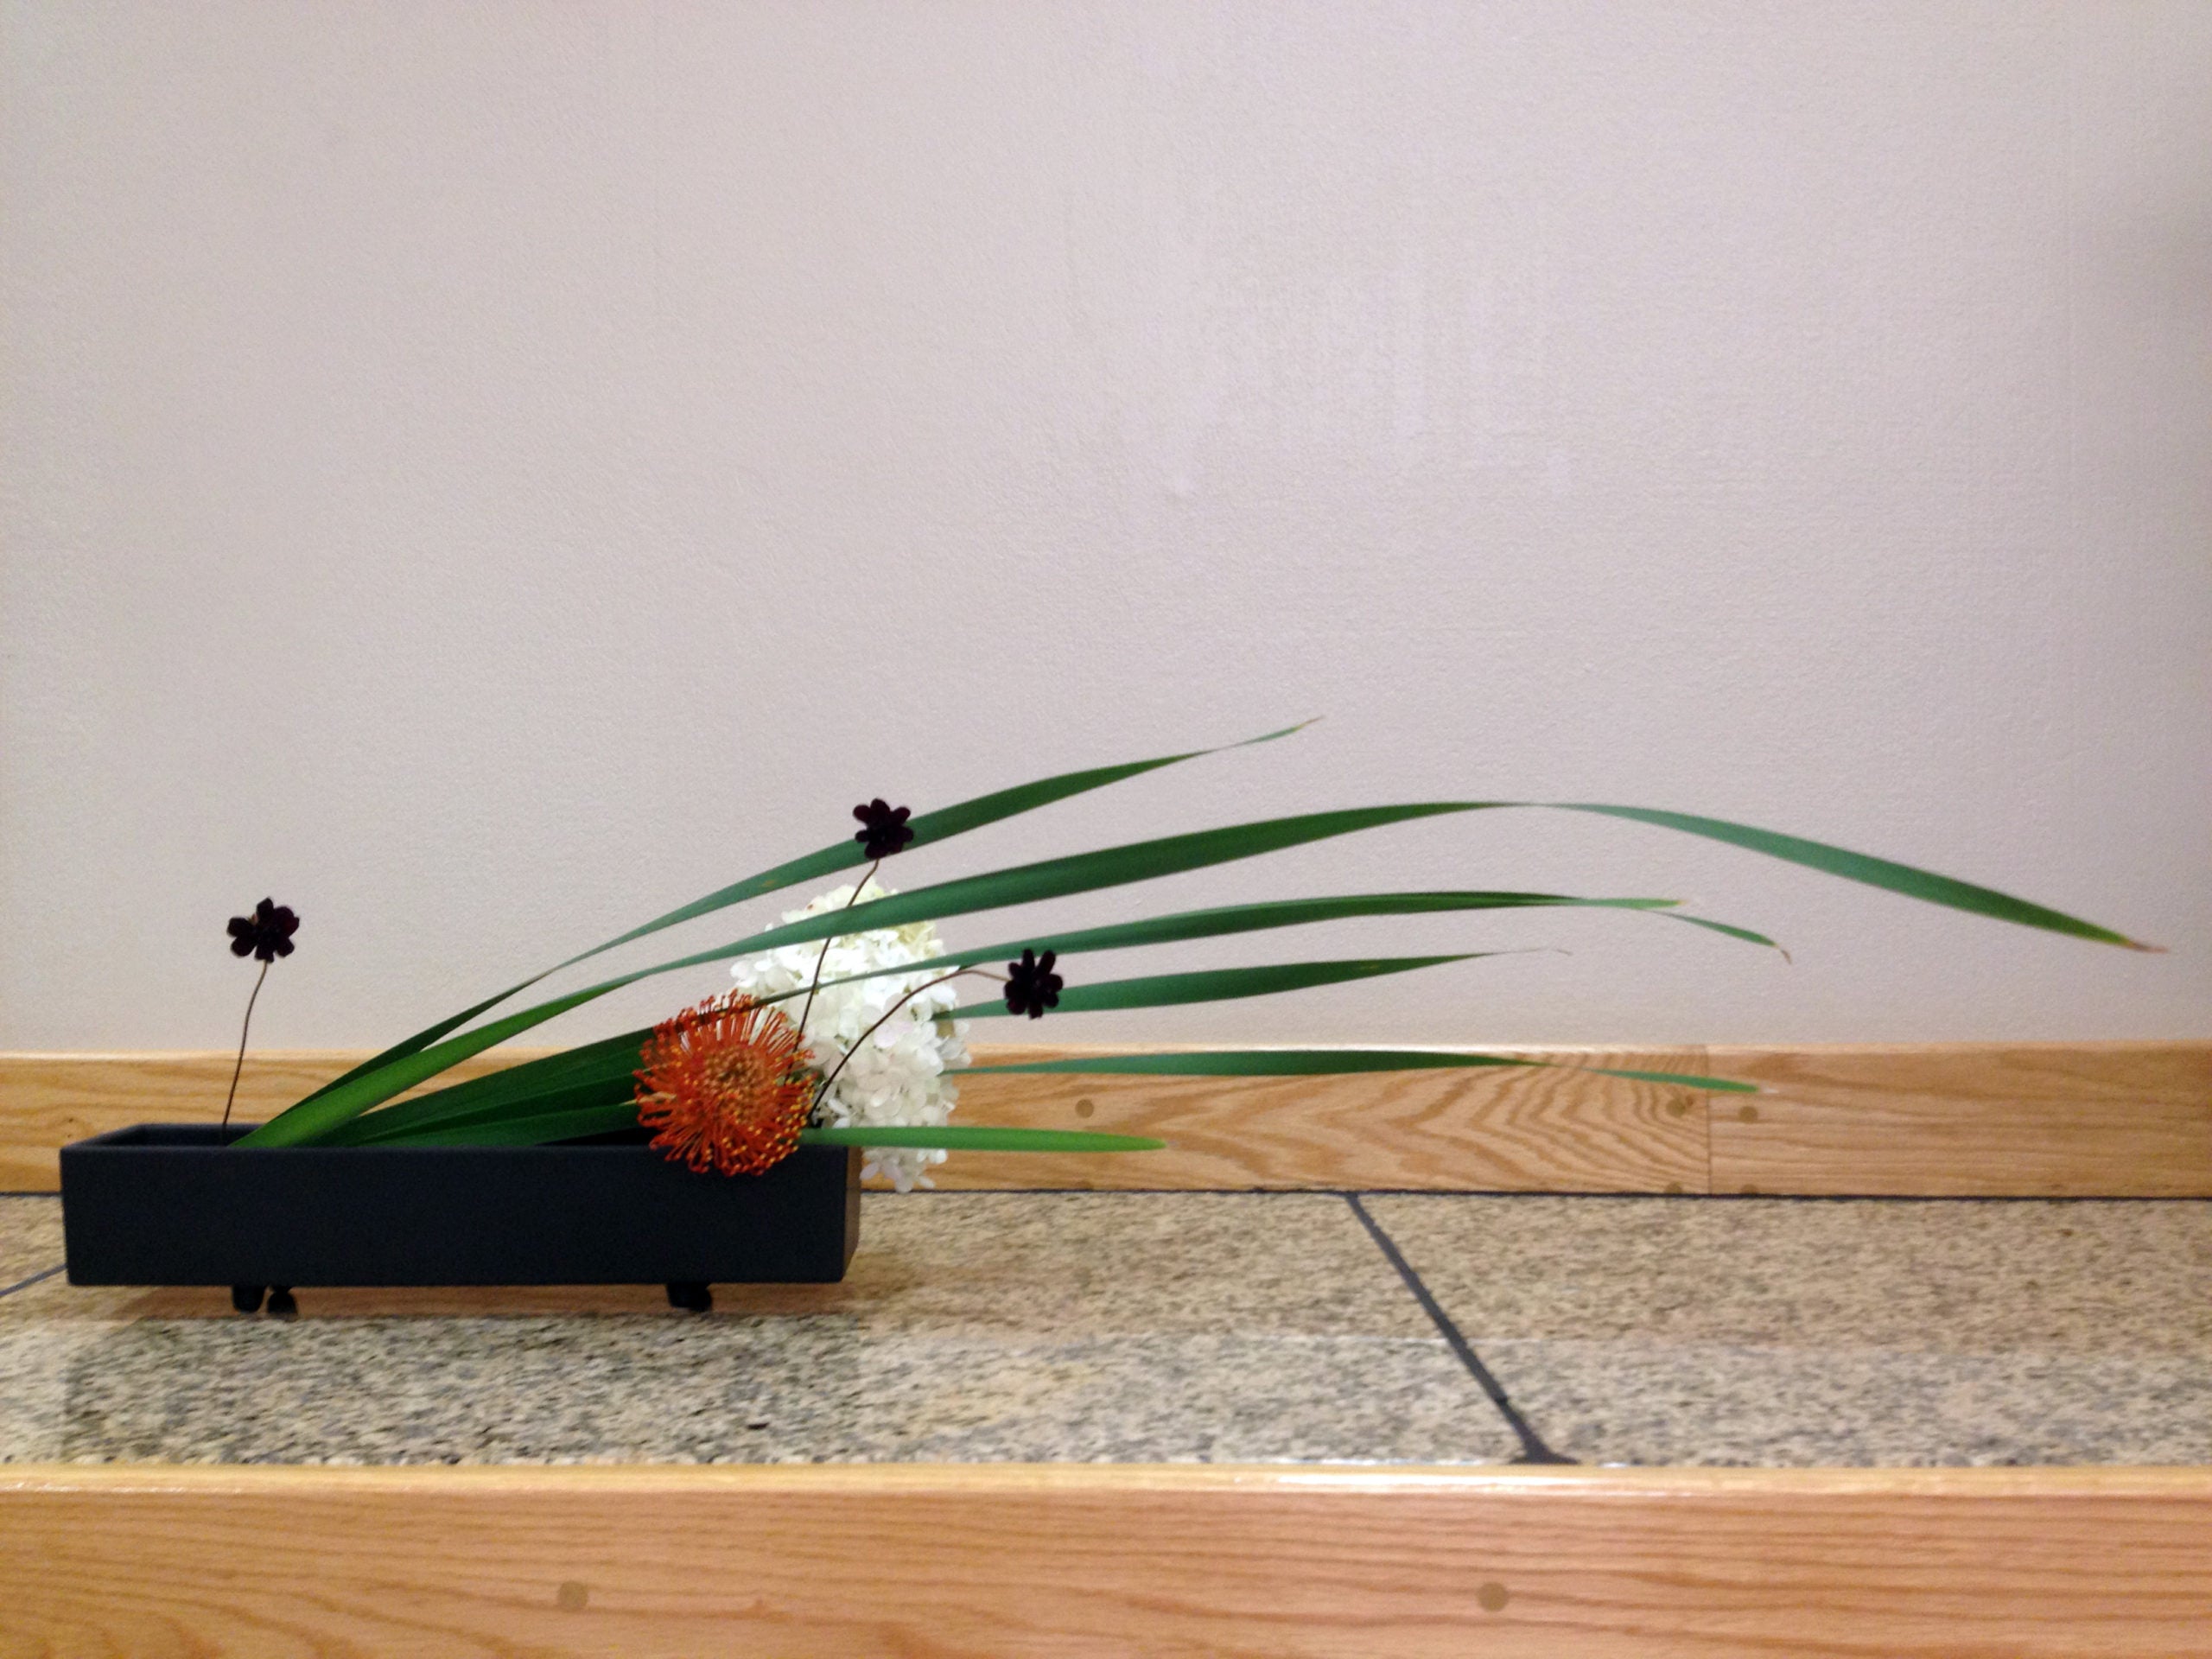 Japanese Flower Arranging with Brian Mikesell March 7, 2015